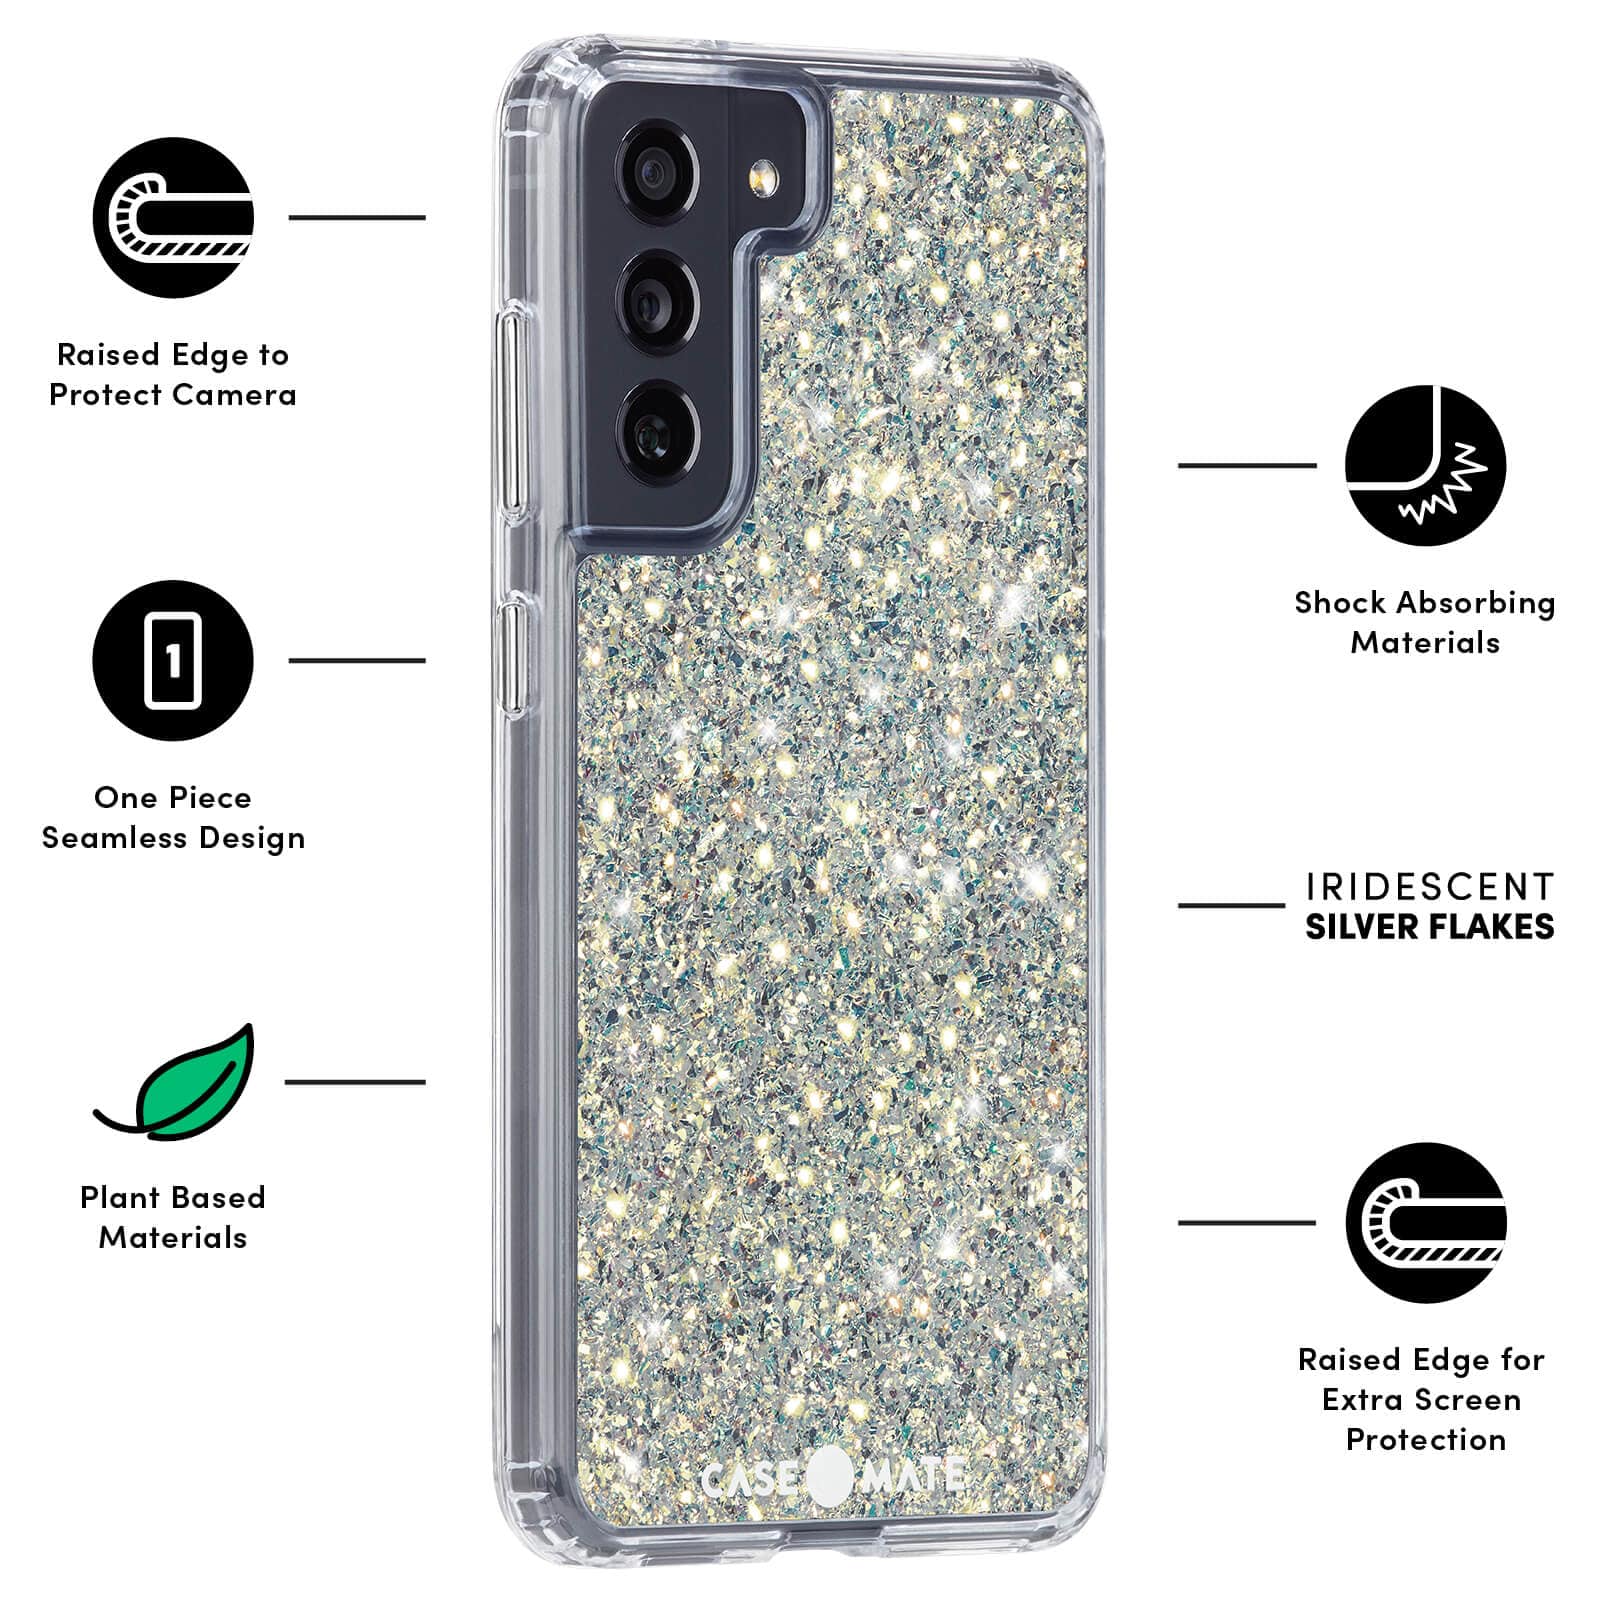 FEATURES: RAISED EDGE TO PROTECT CAMERA, ONE PIECE SEAMLESS DESIGN, PLANT BASED MATERIALS, SHOCK ABSORBING MATERIALS, IRIDESCENT SILVER FLAKES, RAISED EDGE FOR EXTRA SCREEN PROTECTION. COLOR::TWINKLE STARDUST